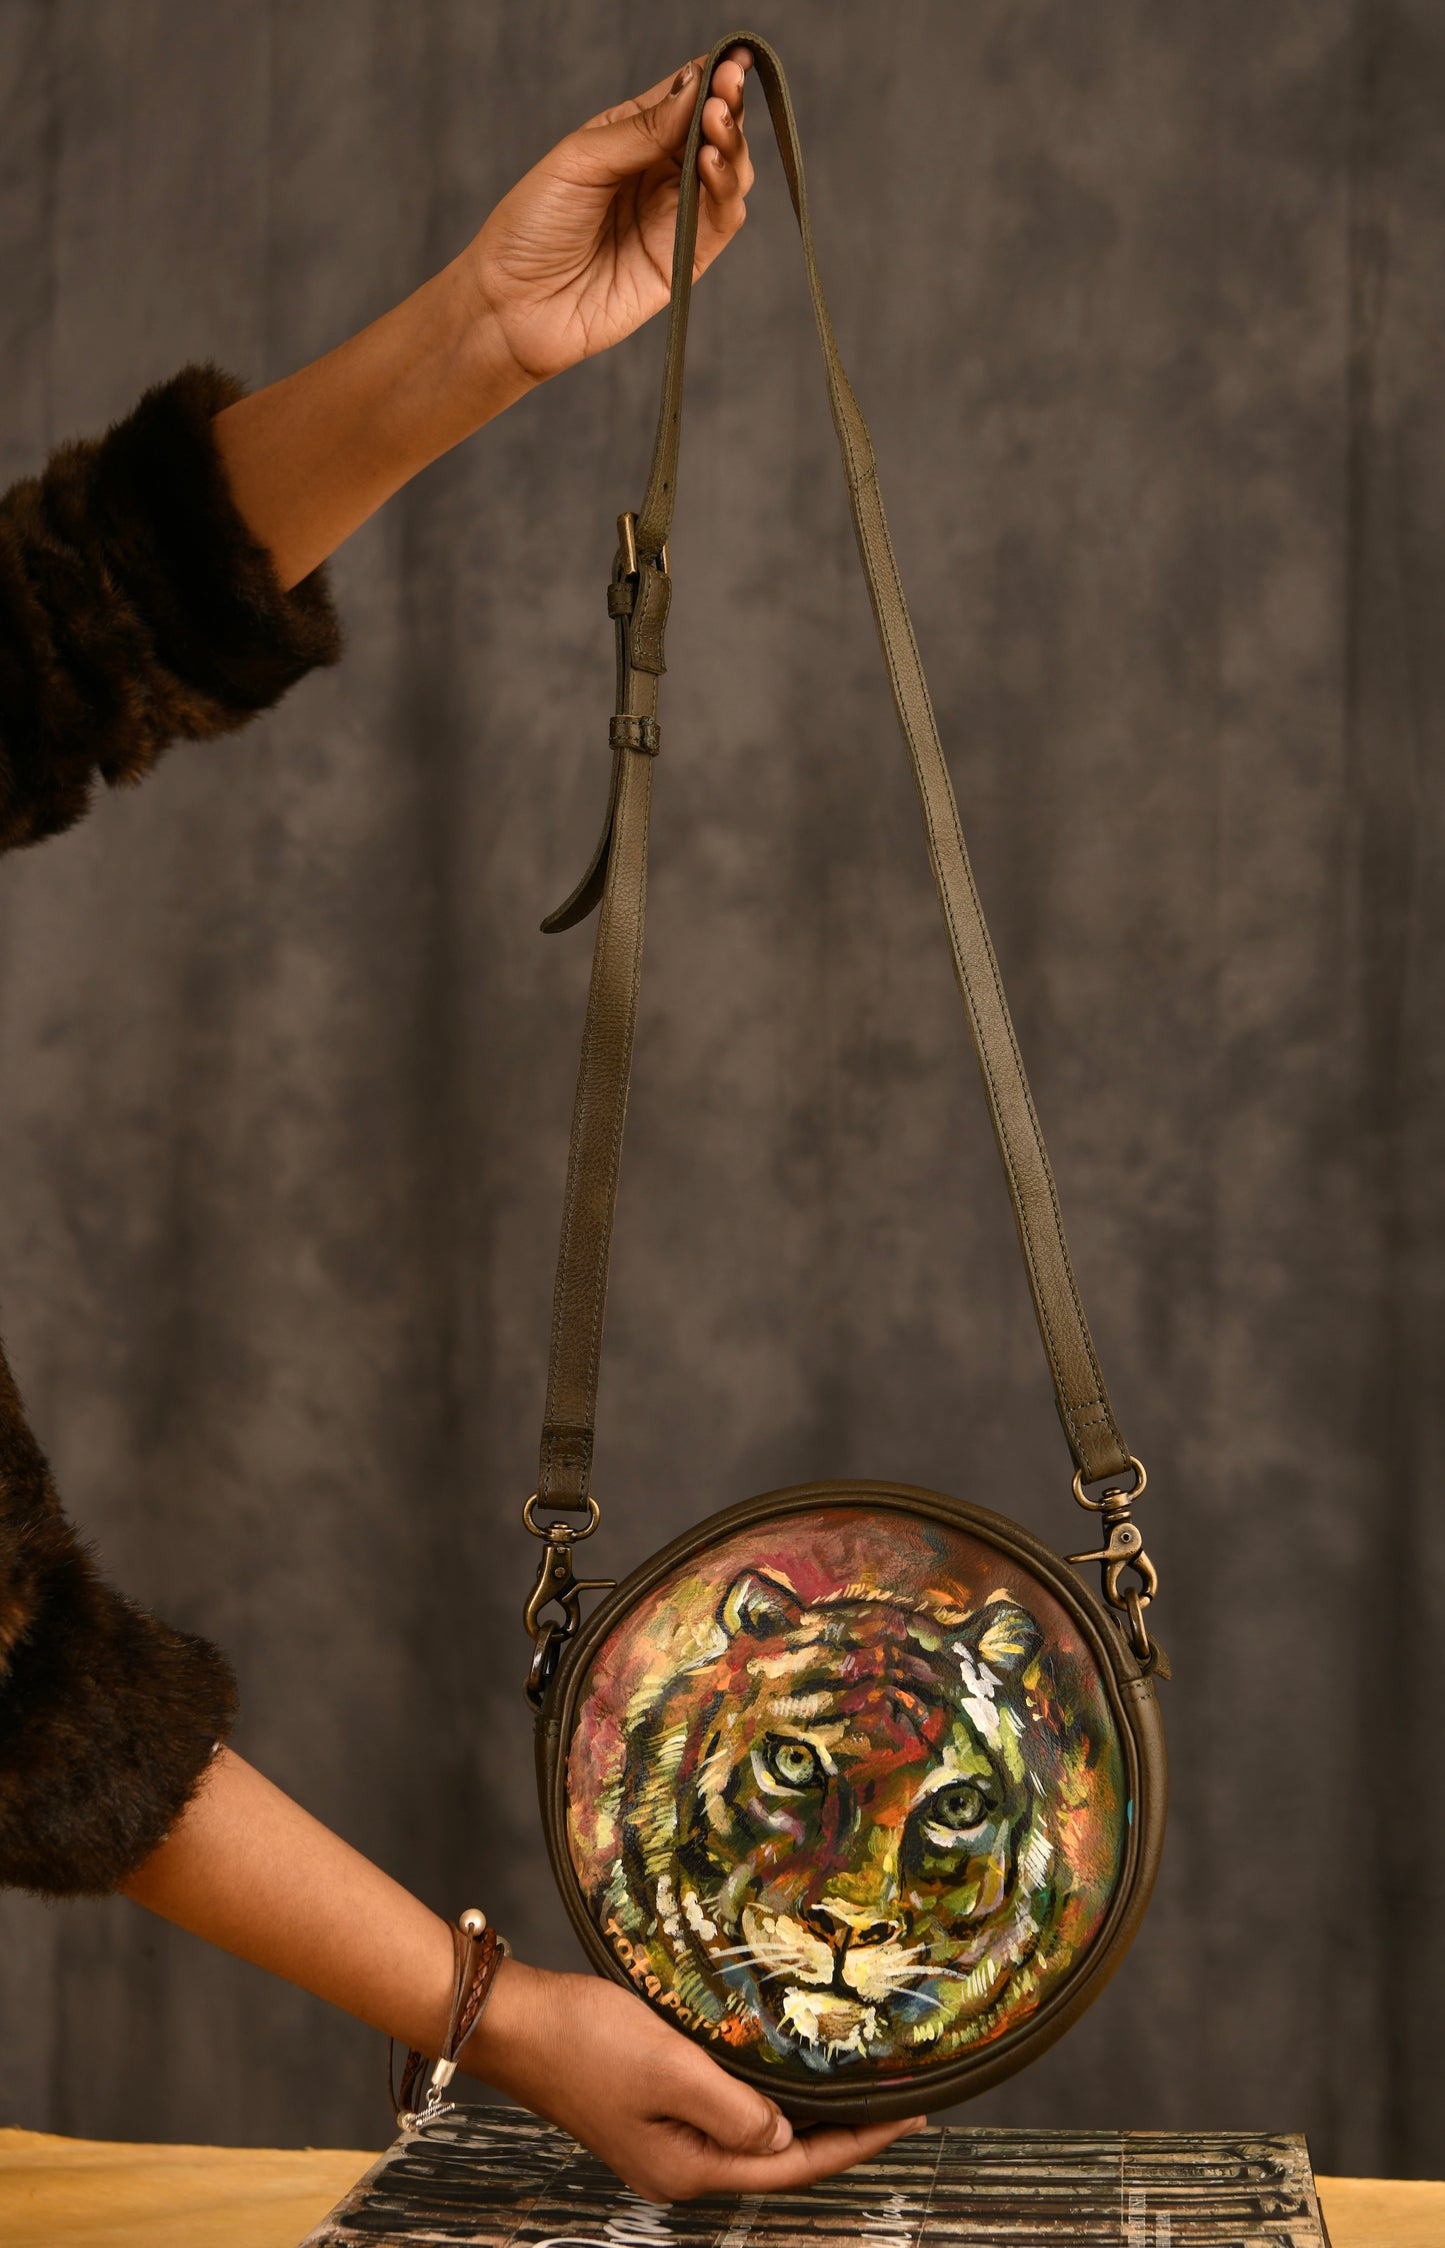 "King Of Corbett" Hand Painted Leather Sling Bag